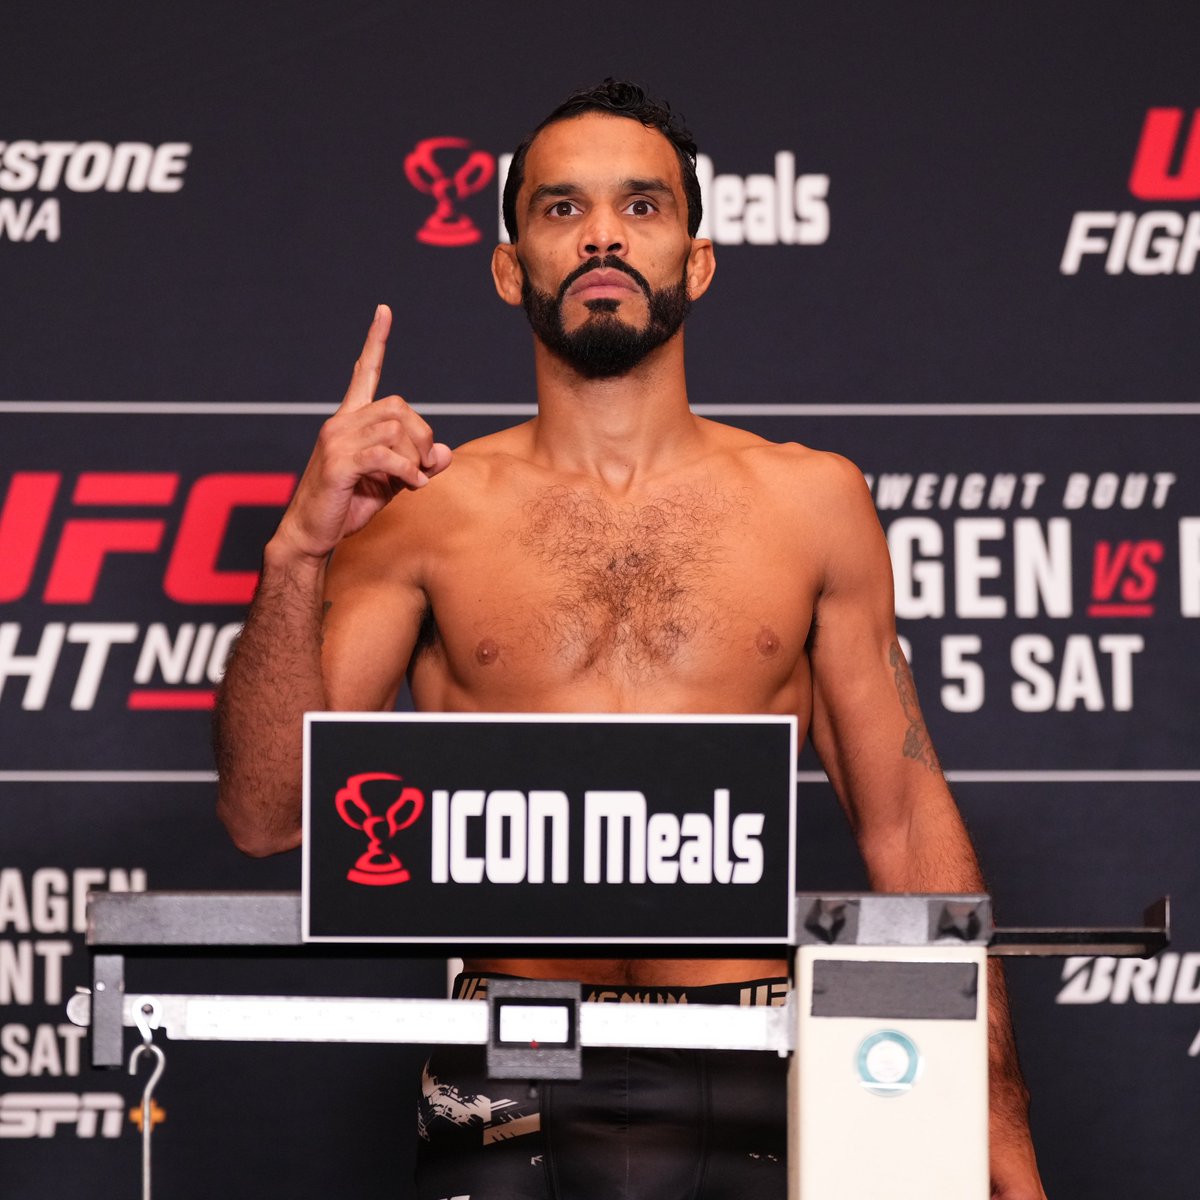 Making our main event official @RobSFont hits the scale at 139 pounds 🚨 #UFCNashville | TOMORROW | Live on @ESPN & @ESPNPlus 📺